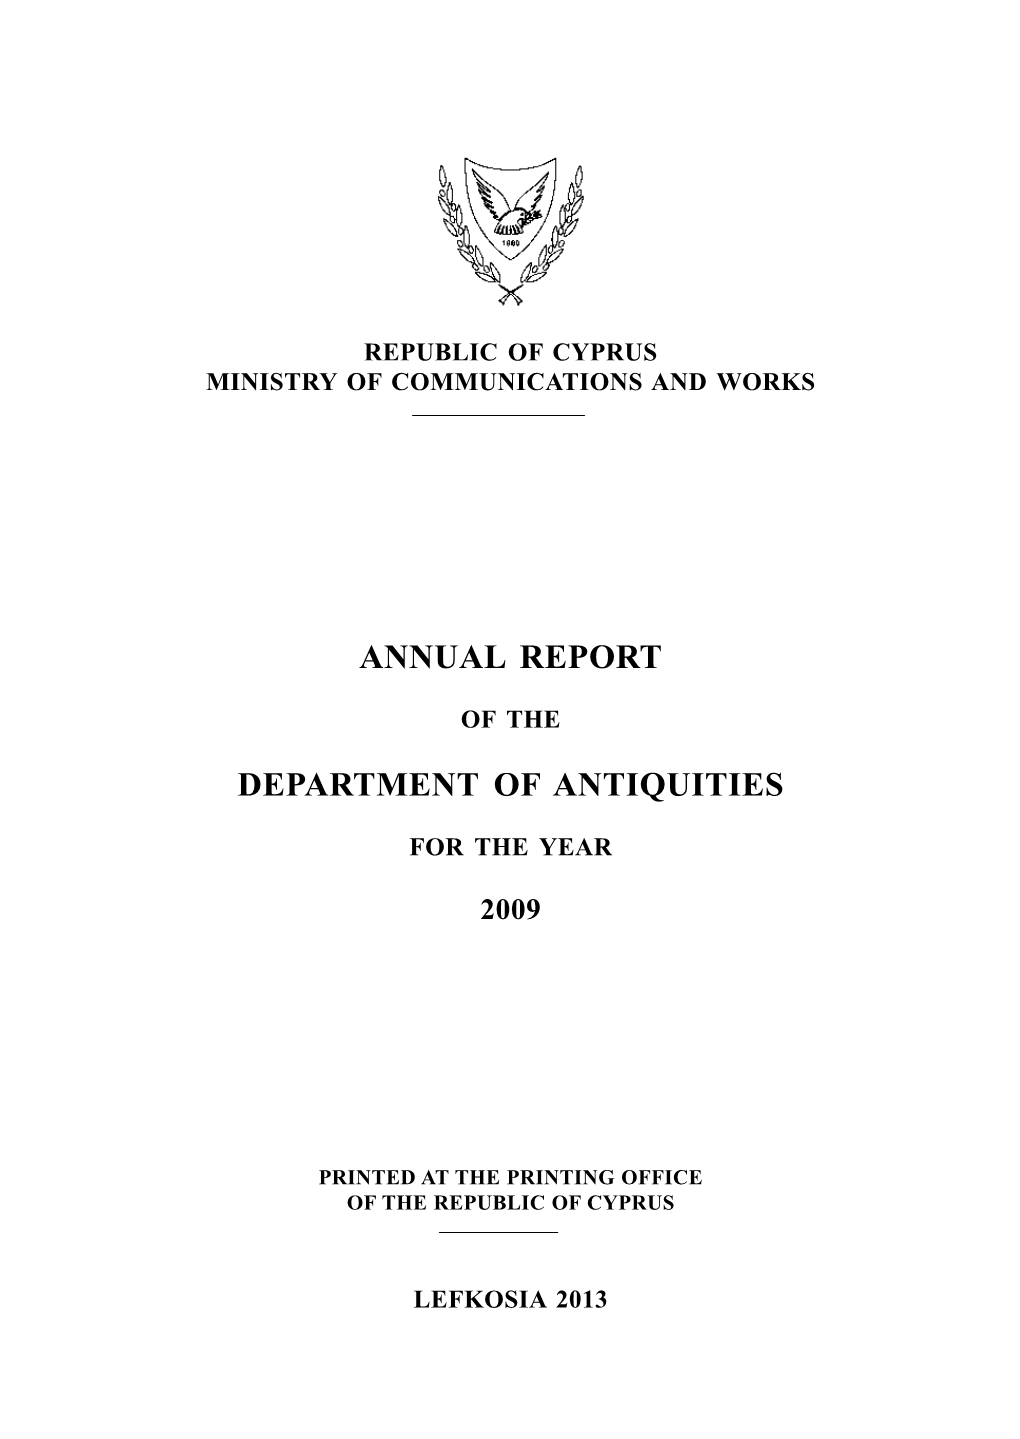 Annual Report of the Department of Antiquities for the Year 2009